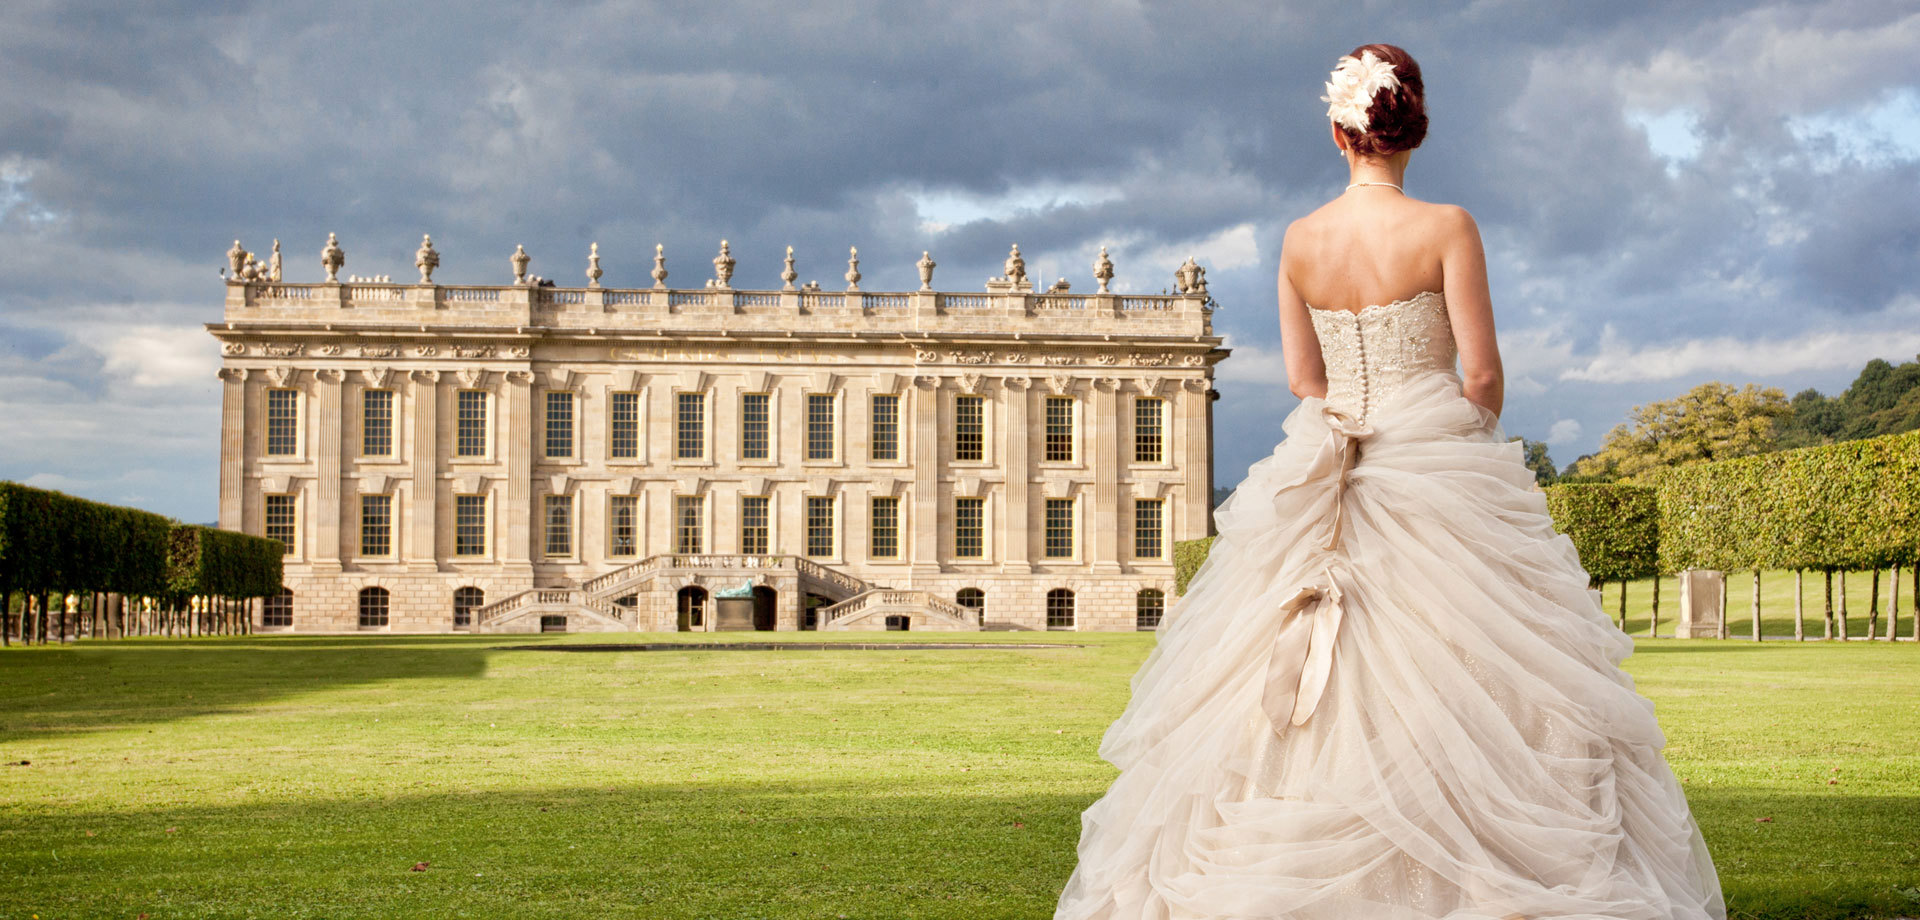 Weddings at Chatsworth in the heart of Derbyshire and the Peak District. Image: Venus Wedding Photography